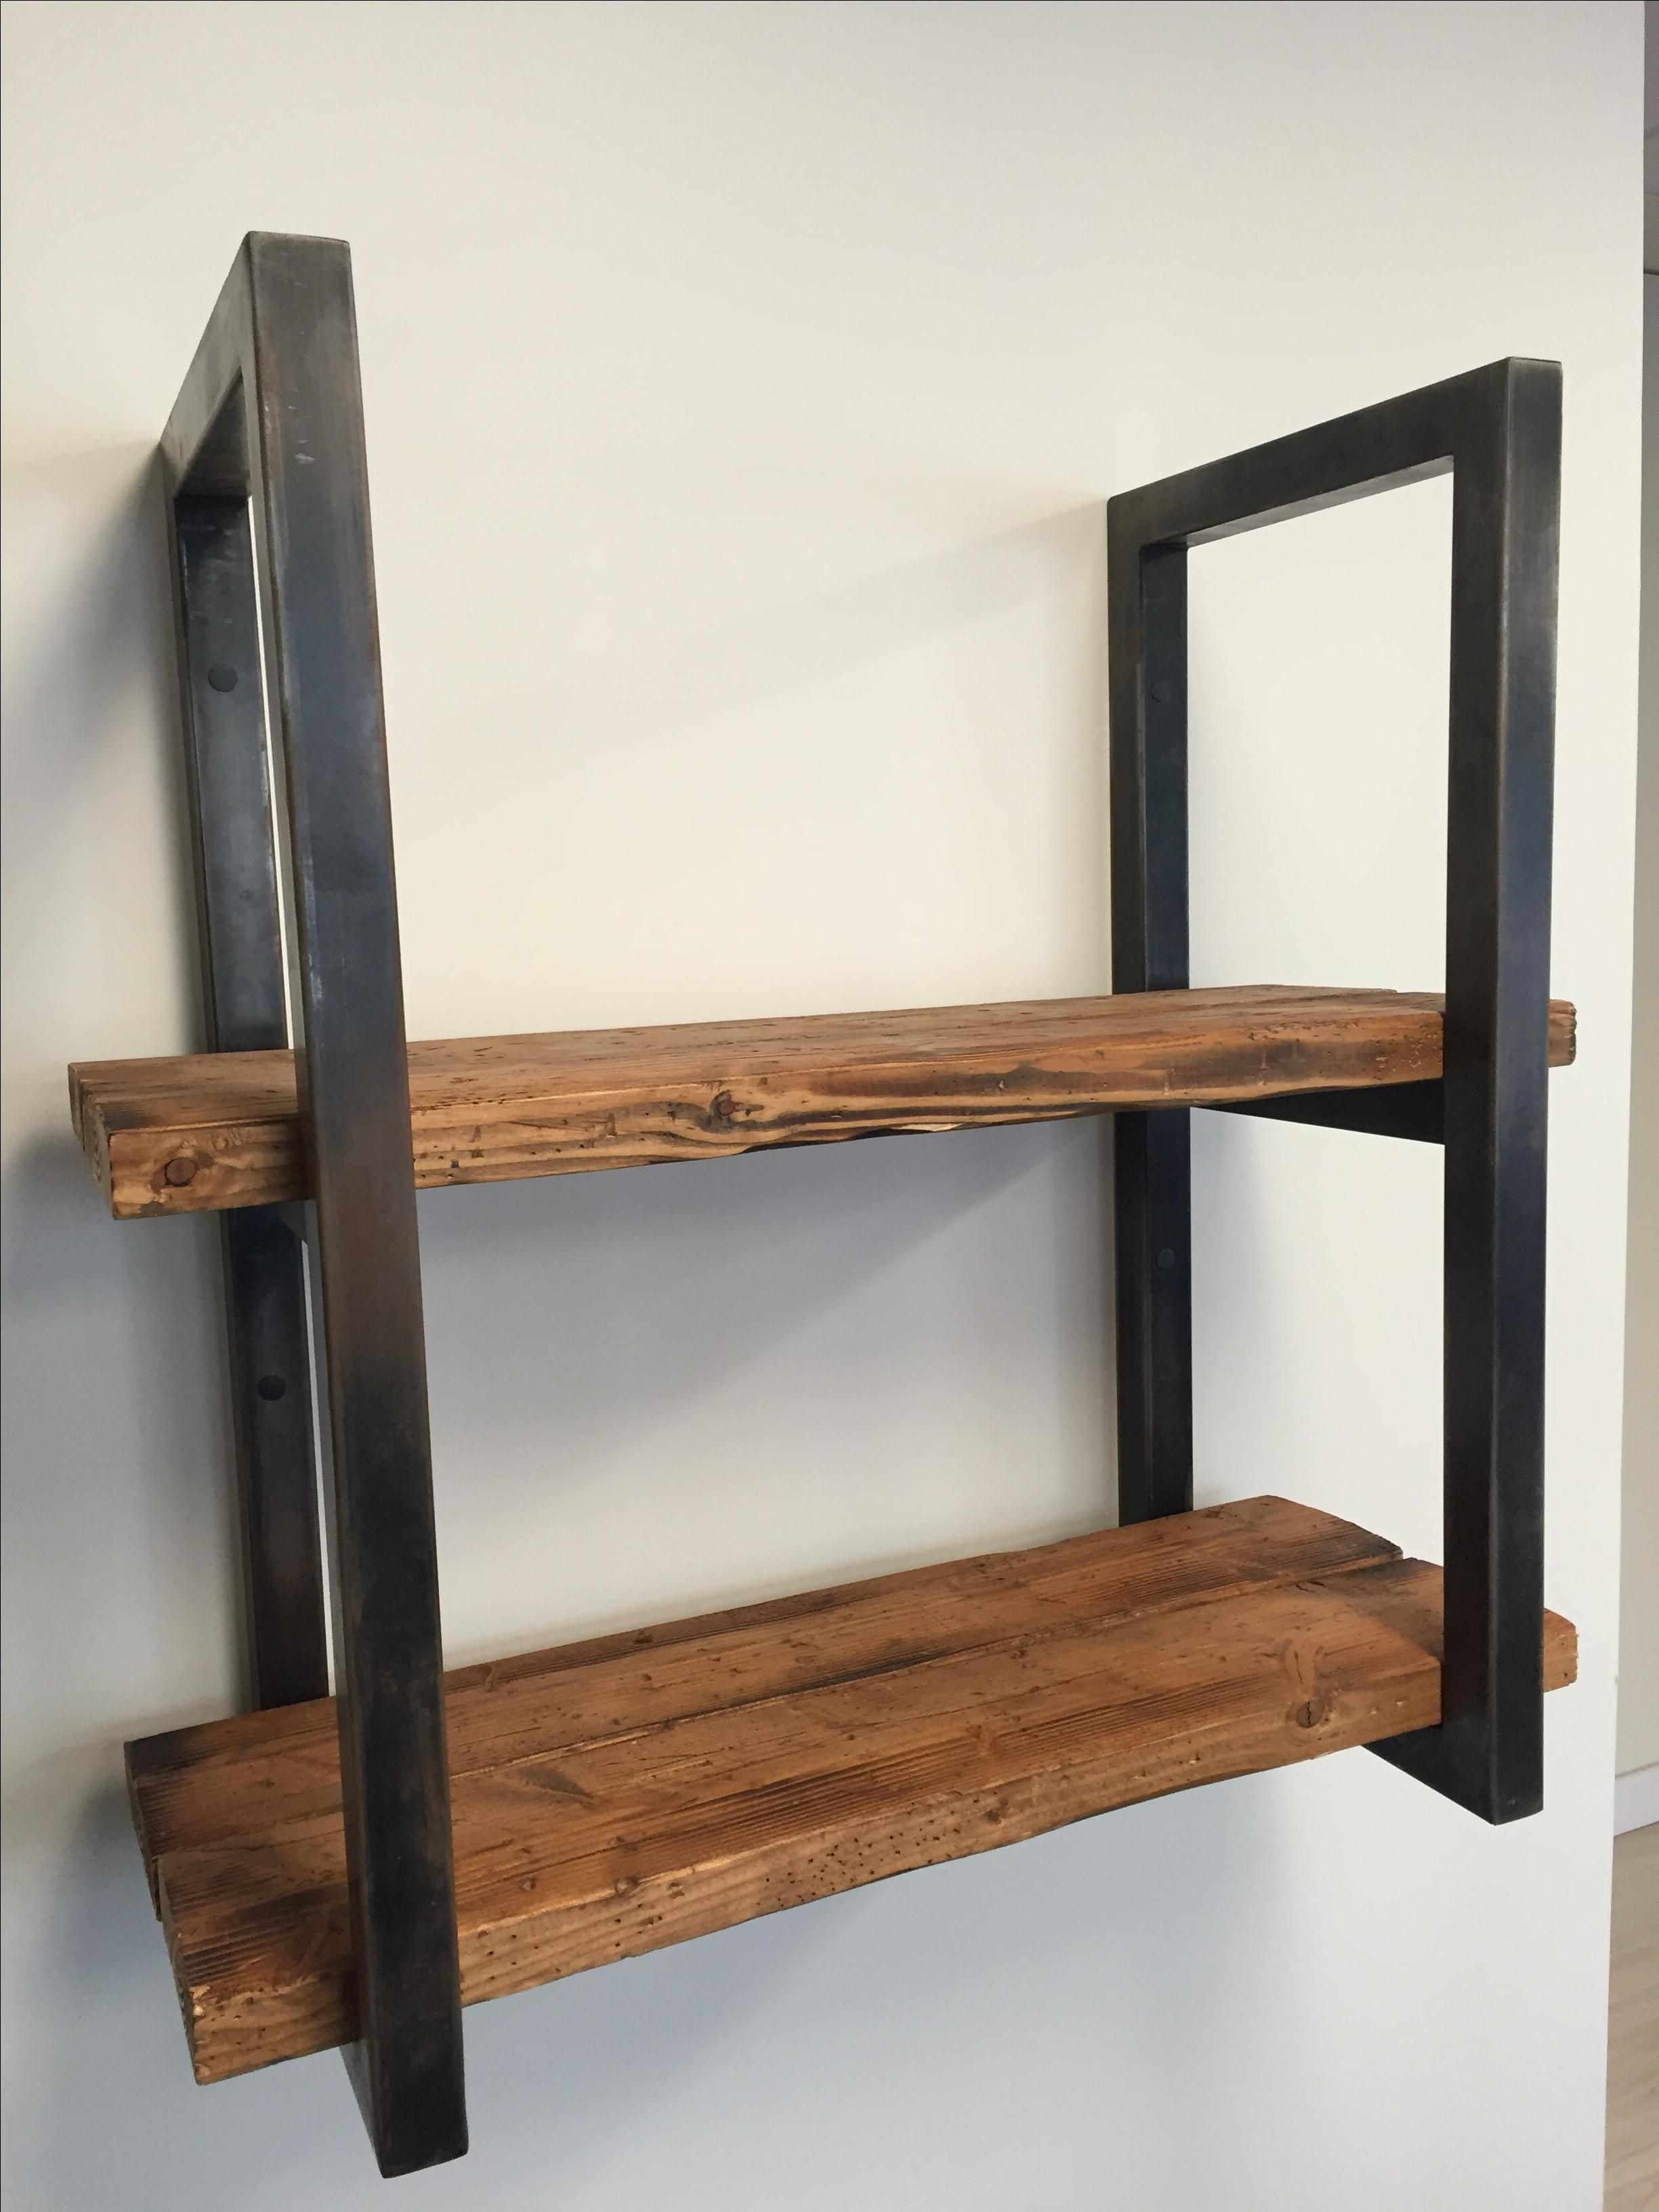 Buy Custom #23 Reclaimed Wood Shelves, made to order from Reception Counter Solutions 